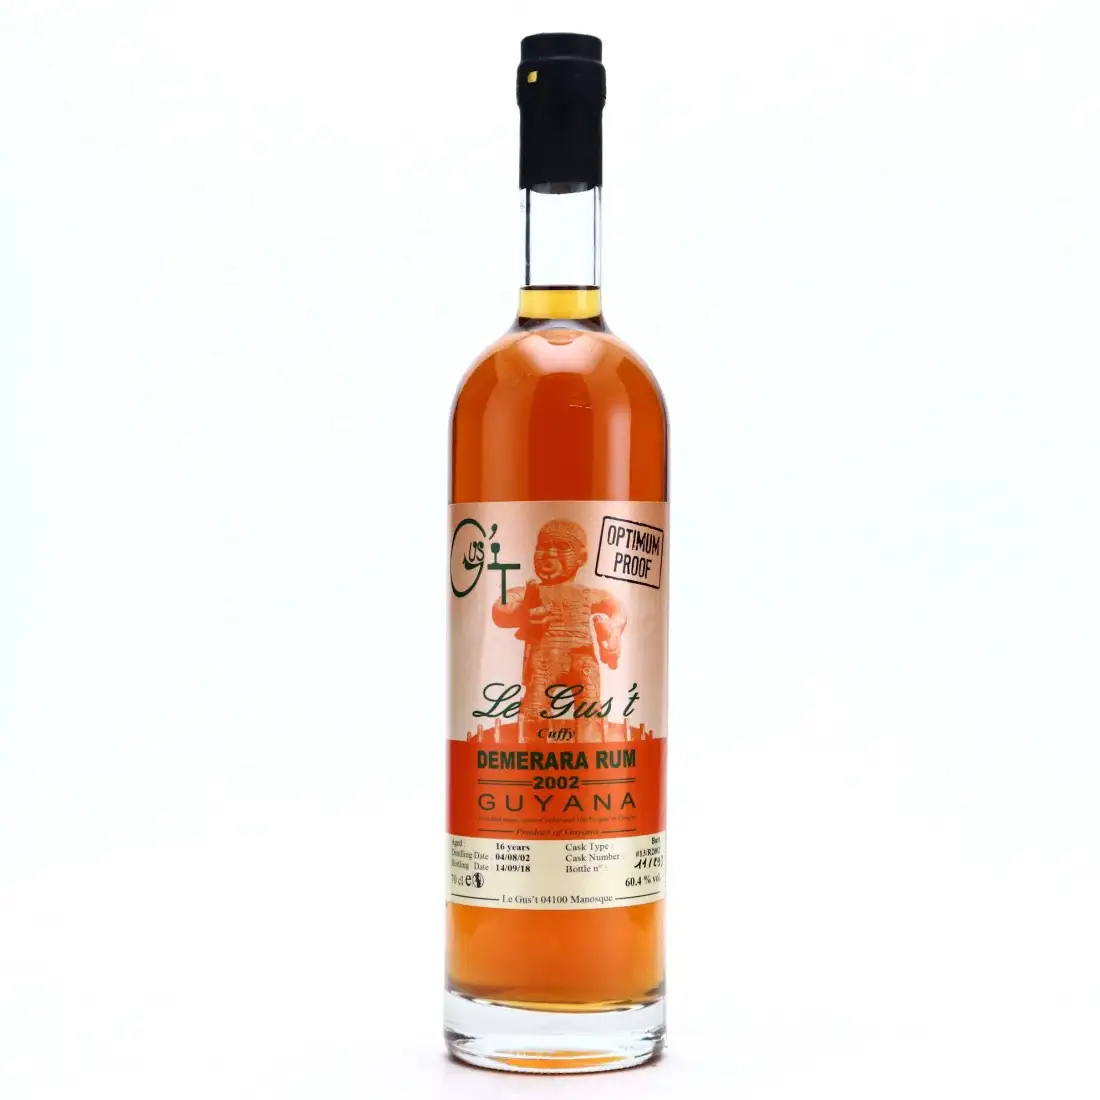 Image of the front of the bottle of the rum Demerara Rum Cuffy Optimum Proof